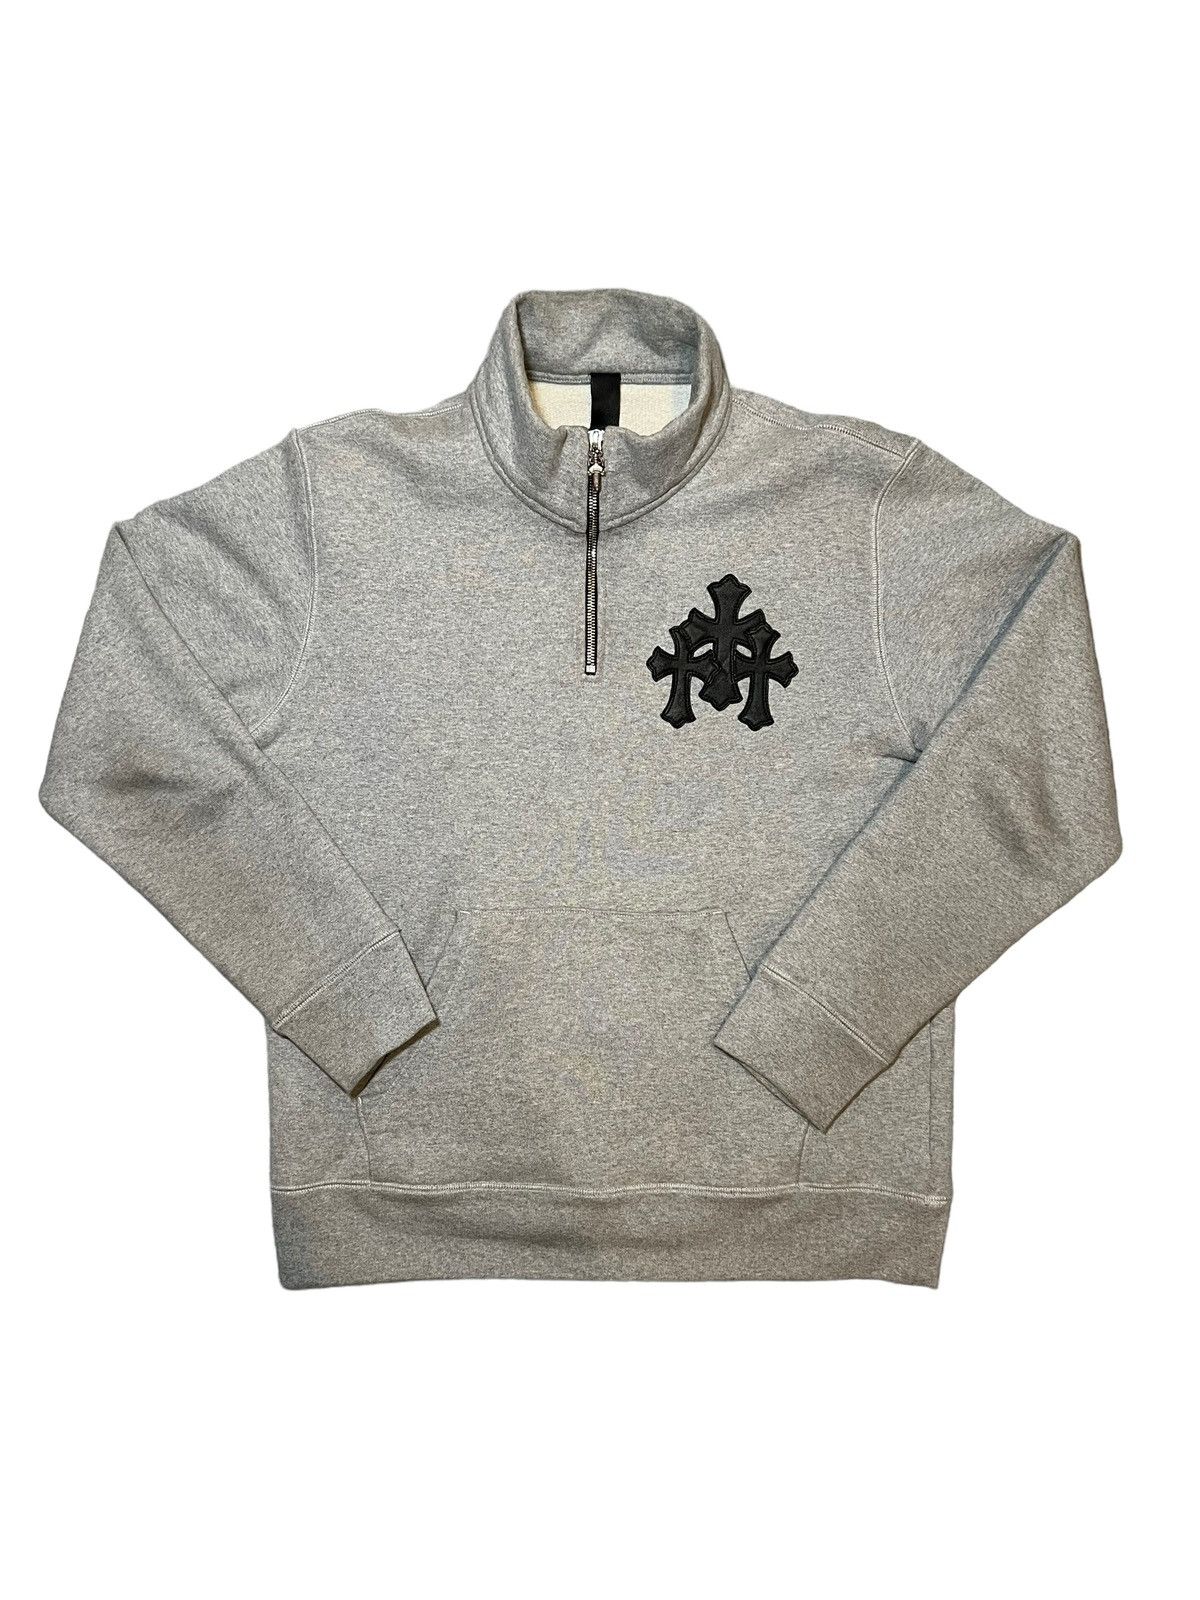 Chrome Hearts Chrome Hearts leather patch quarter zip | Grailed